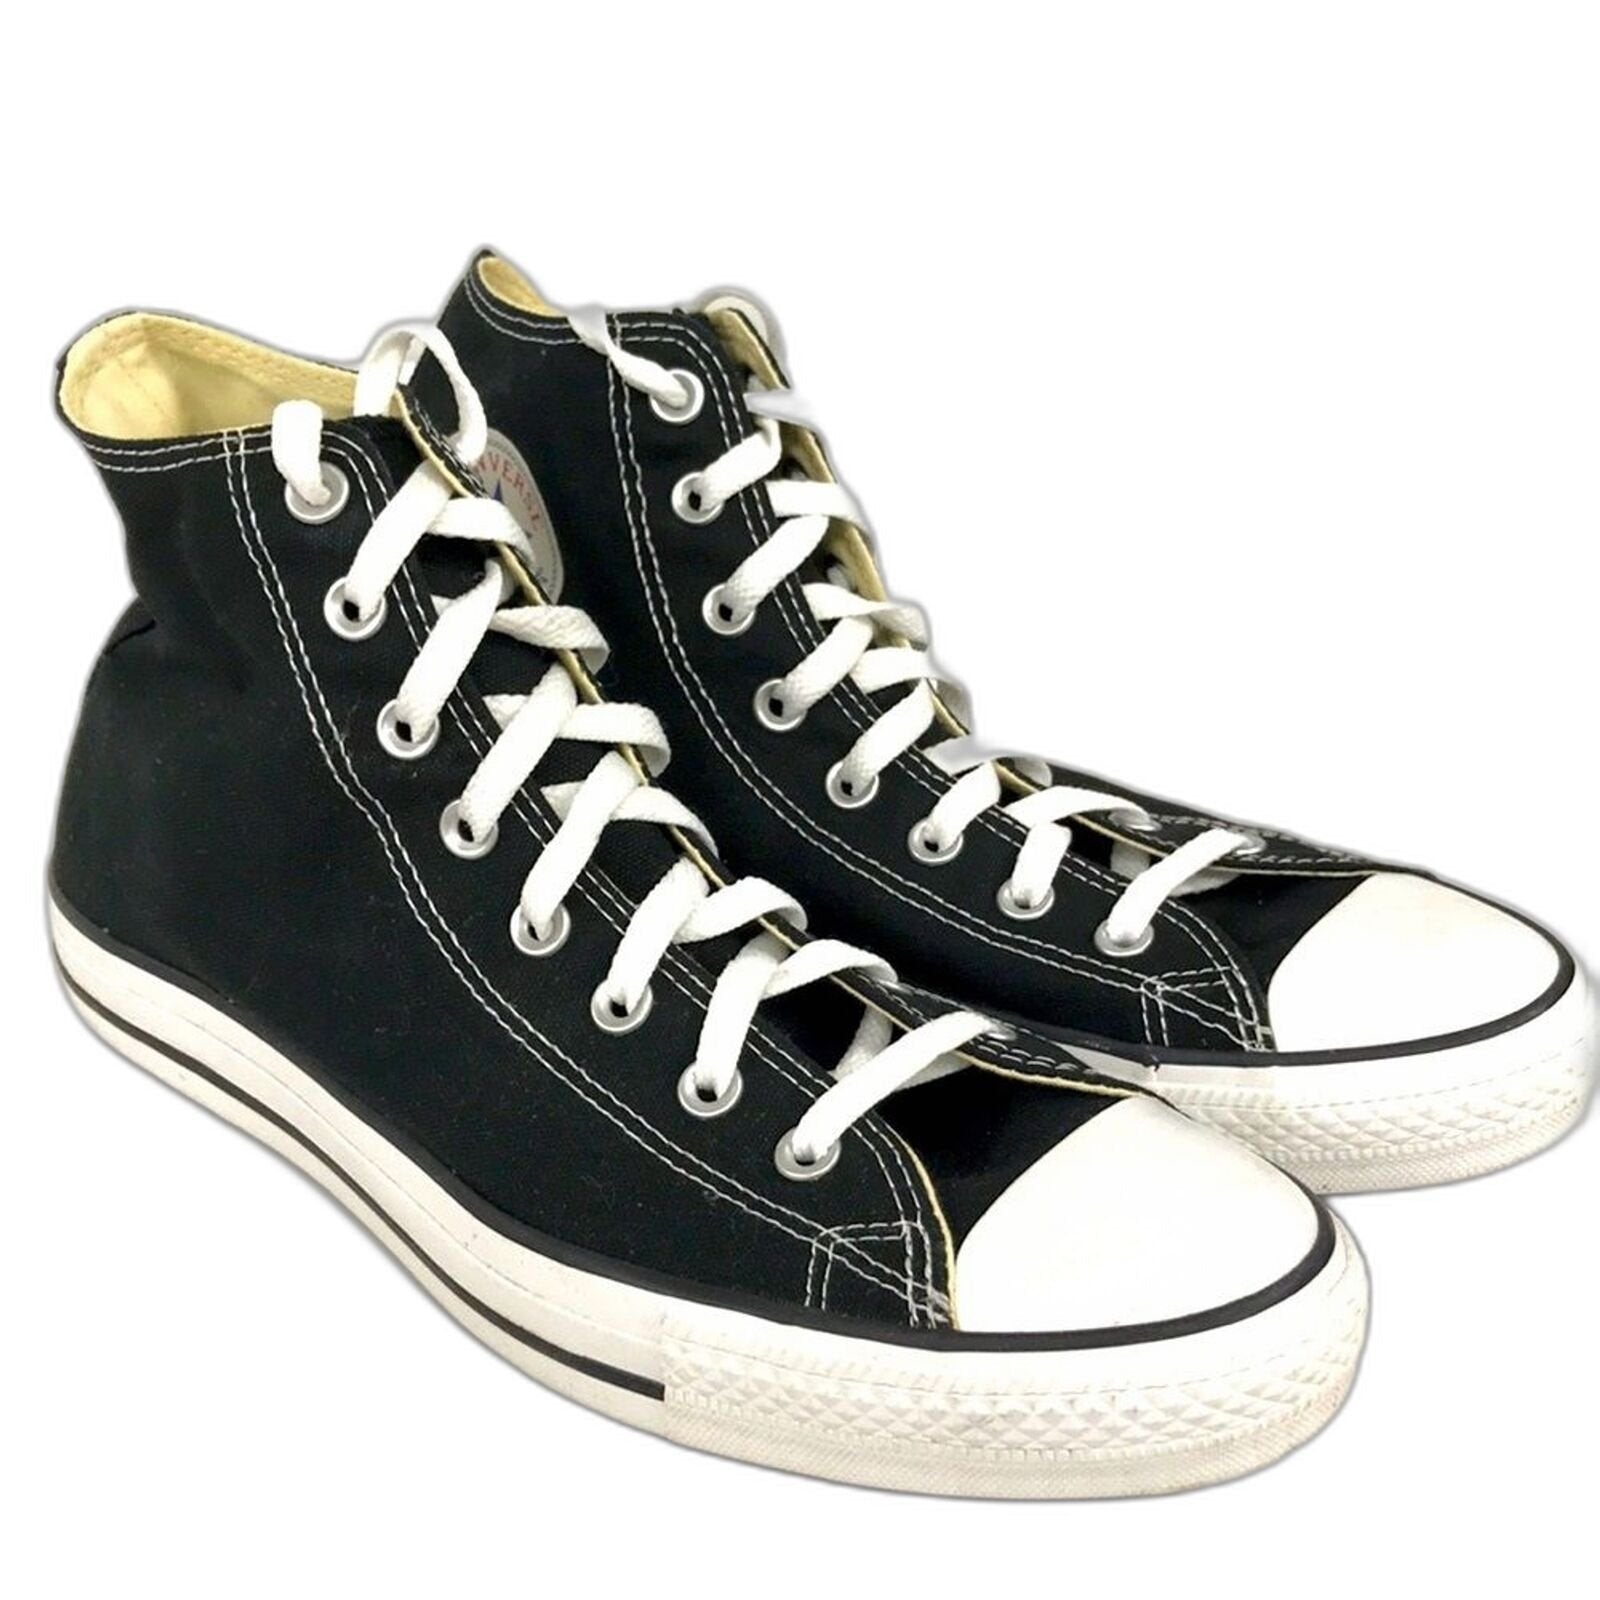 Converse Chuck Taylor All Star High Top Sneakers Womens 12 US